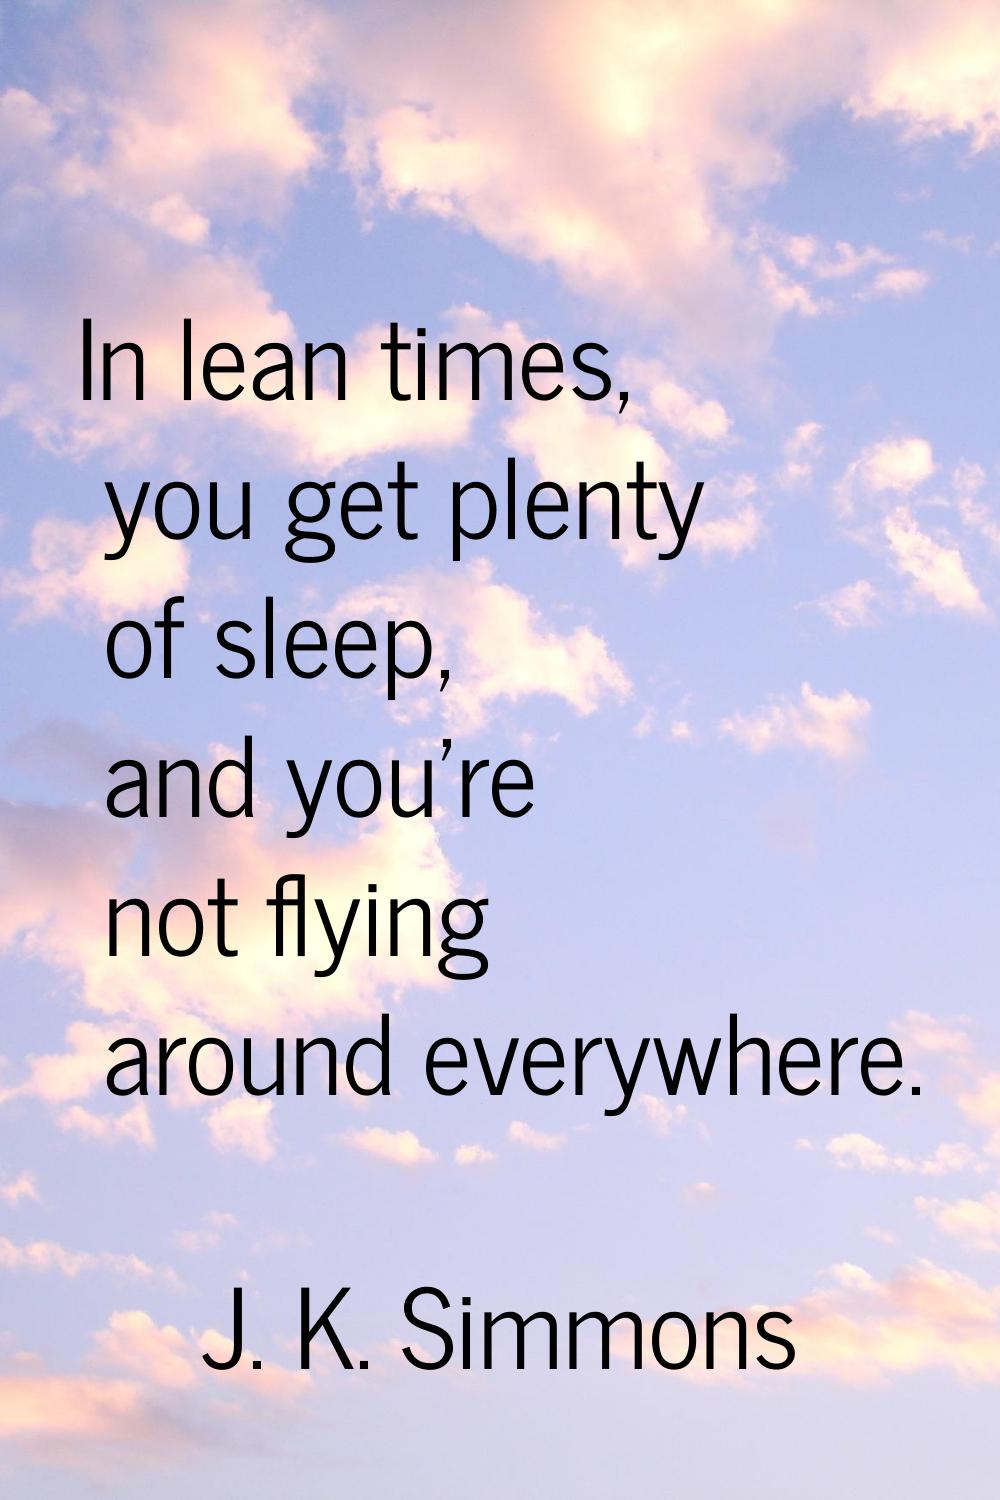 In lean times, you get plenty of sleep, and you're not flying around everywhere.